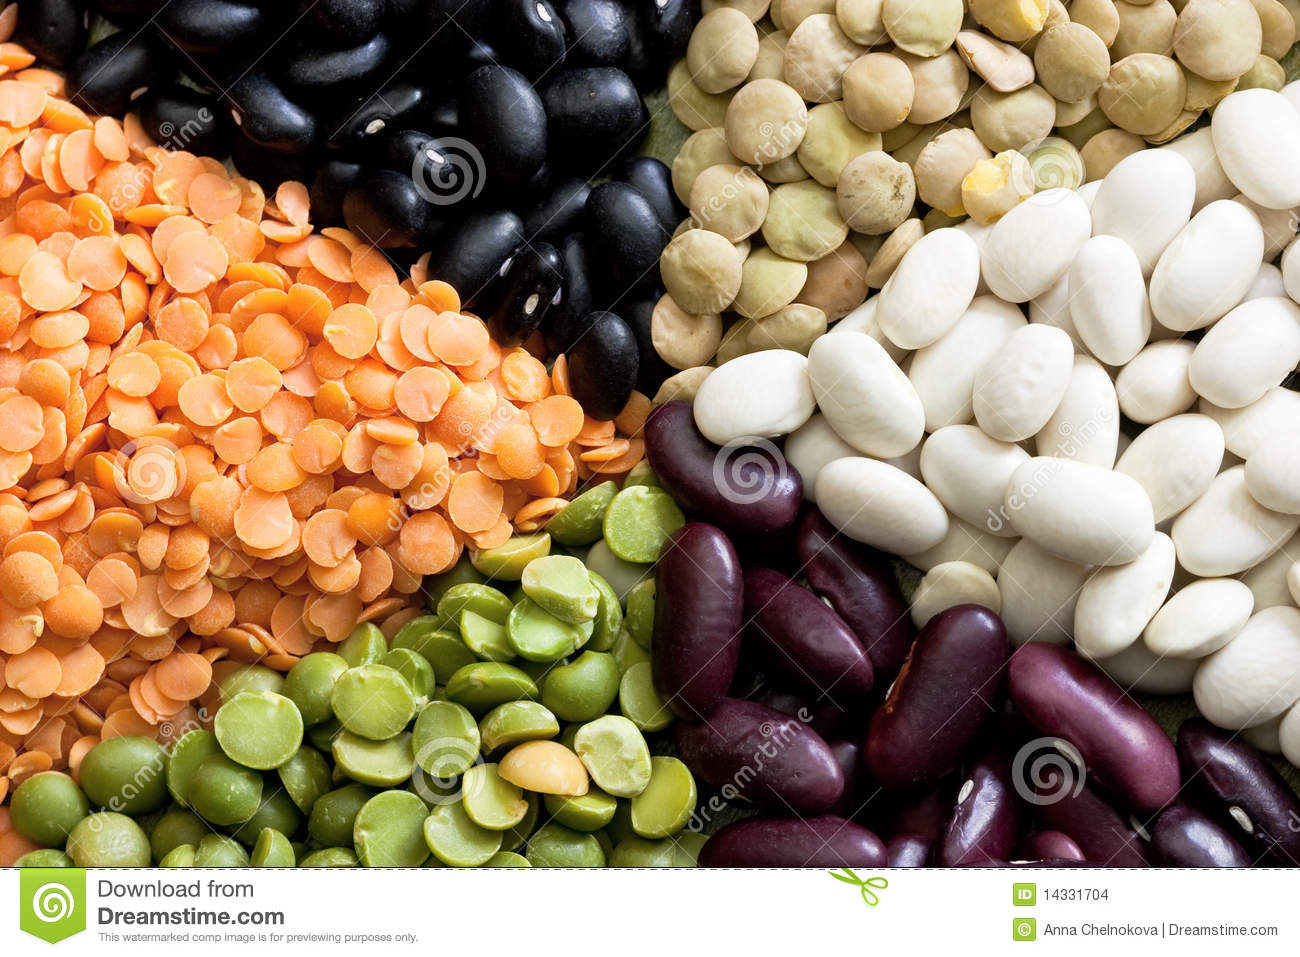 Mixed Dried Beans Stock Images   Image  14331704